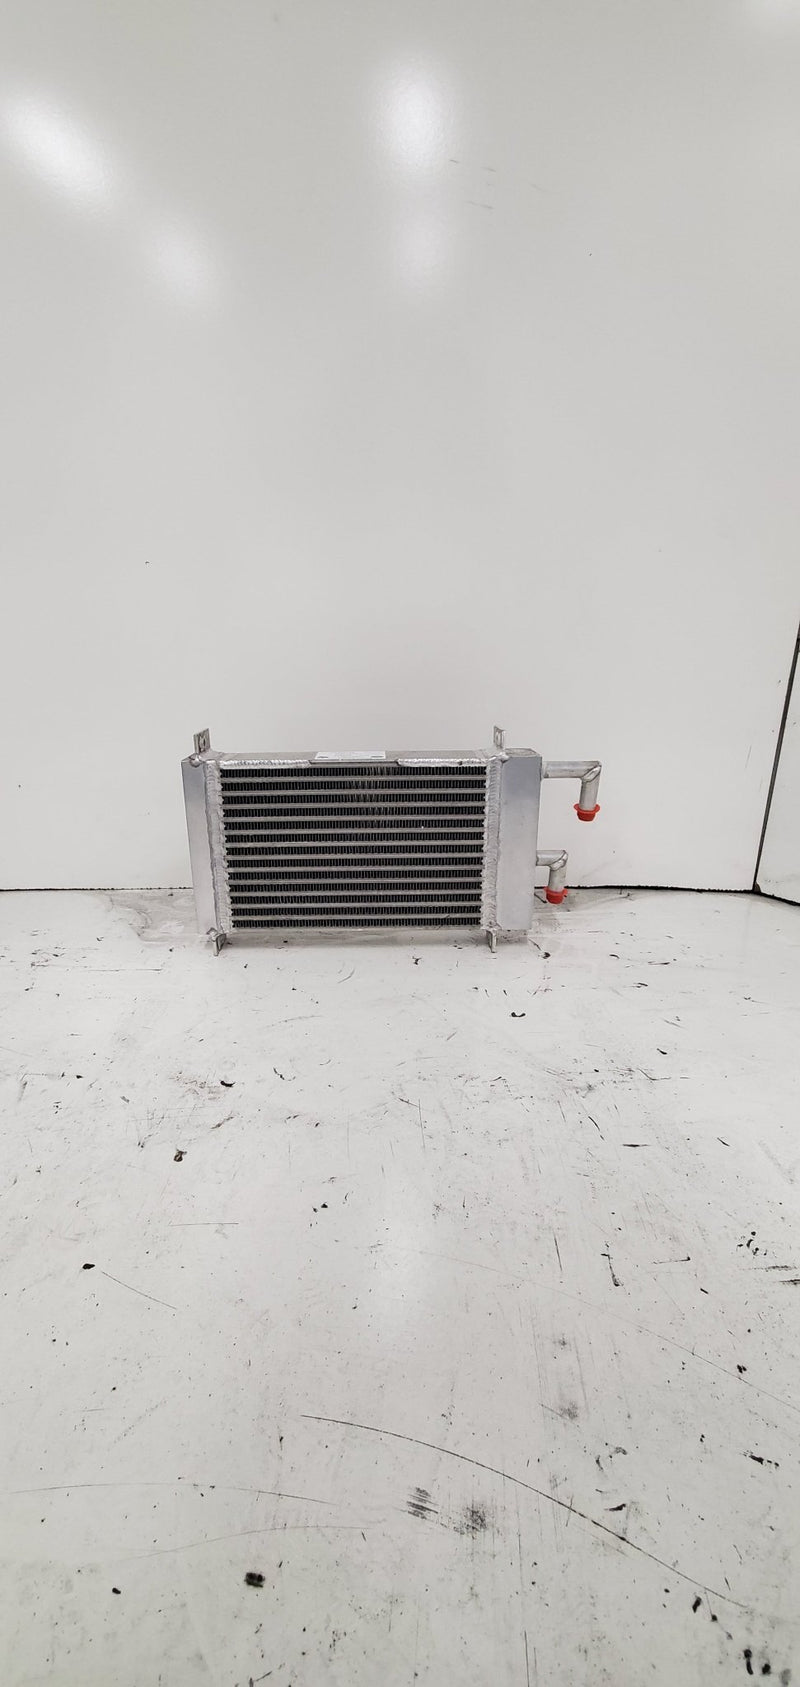 Load image into Gallery viewer, Hitachi EX 100-1 Oil Cooler # 870395 - Radiator Supply House
